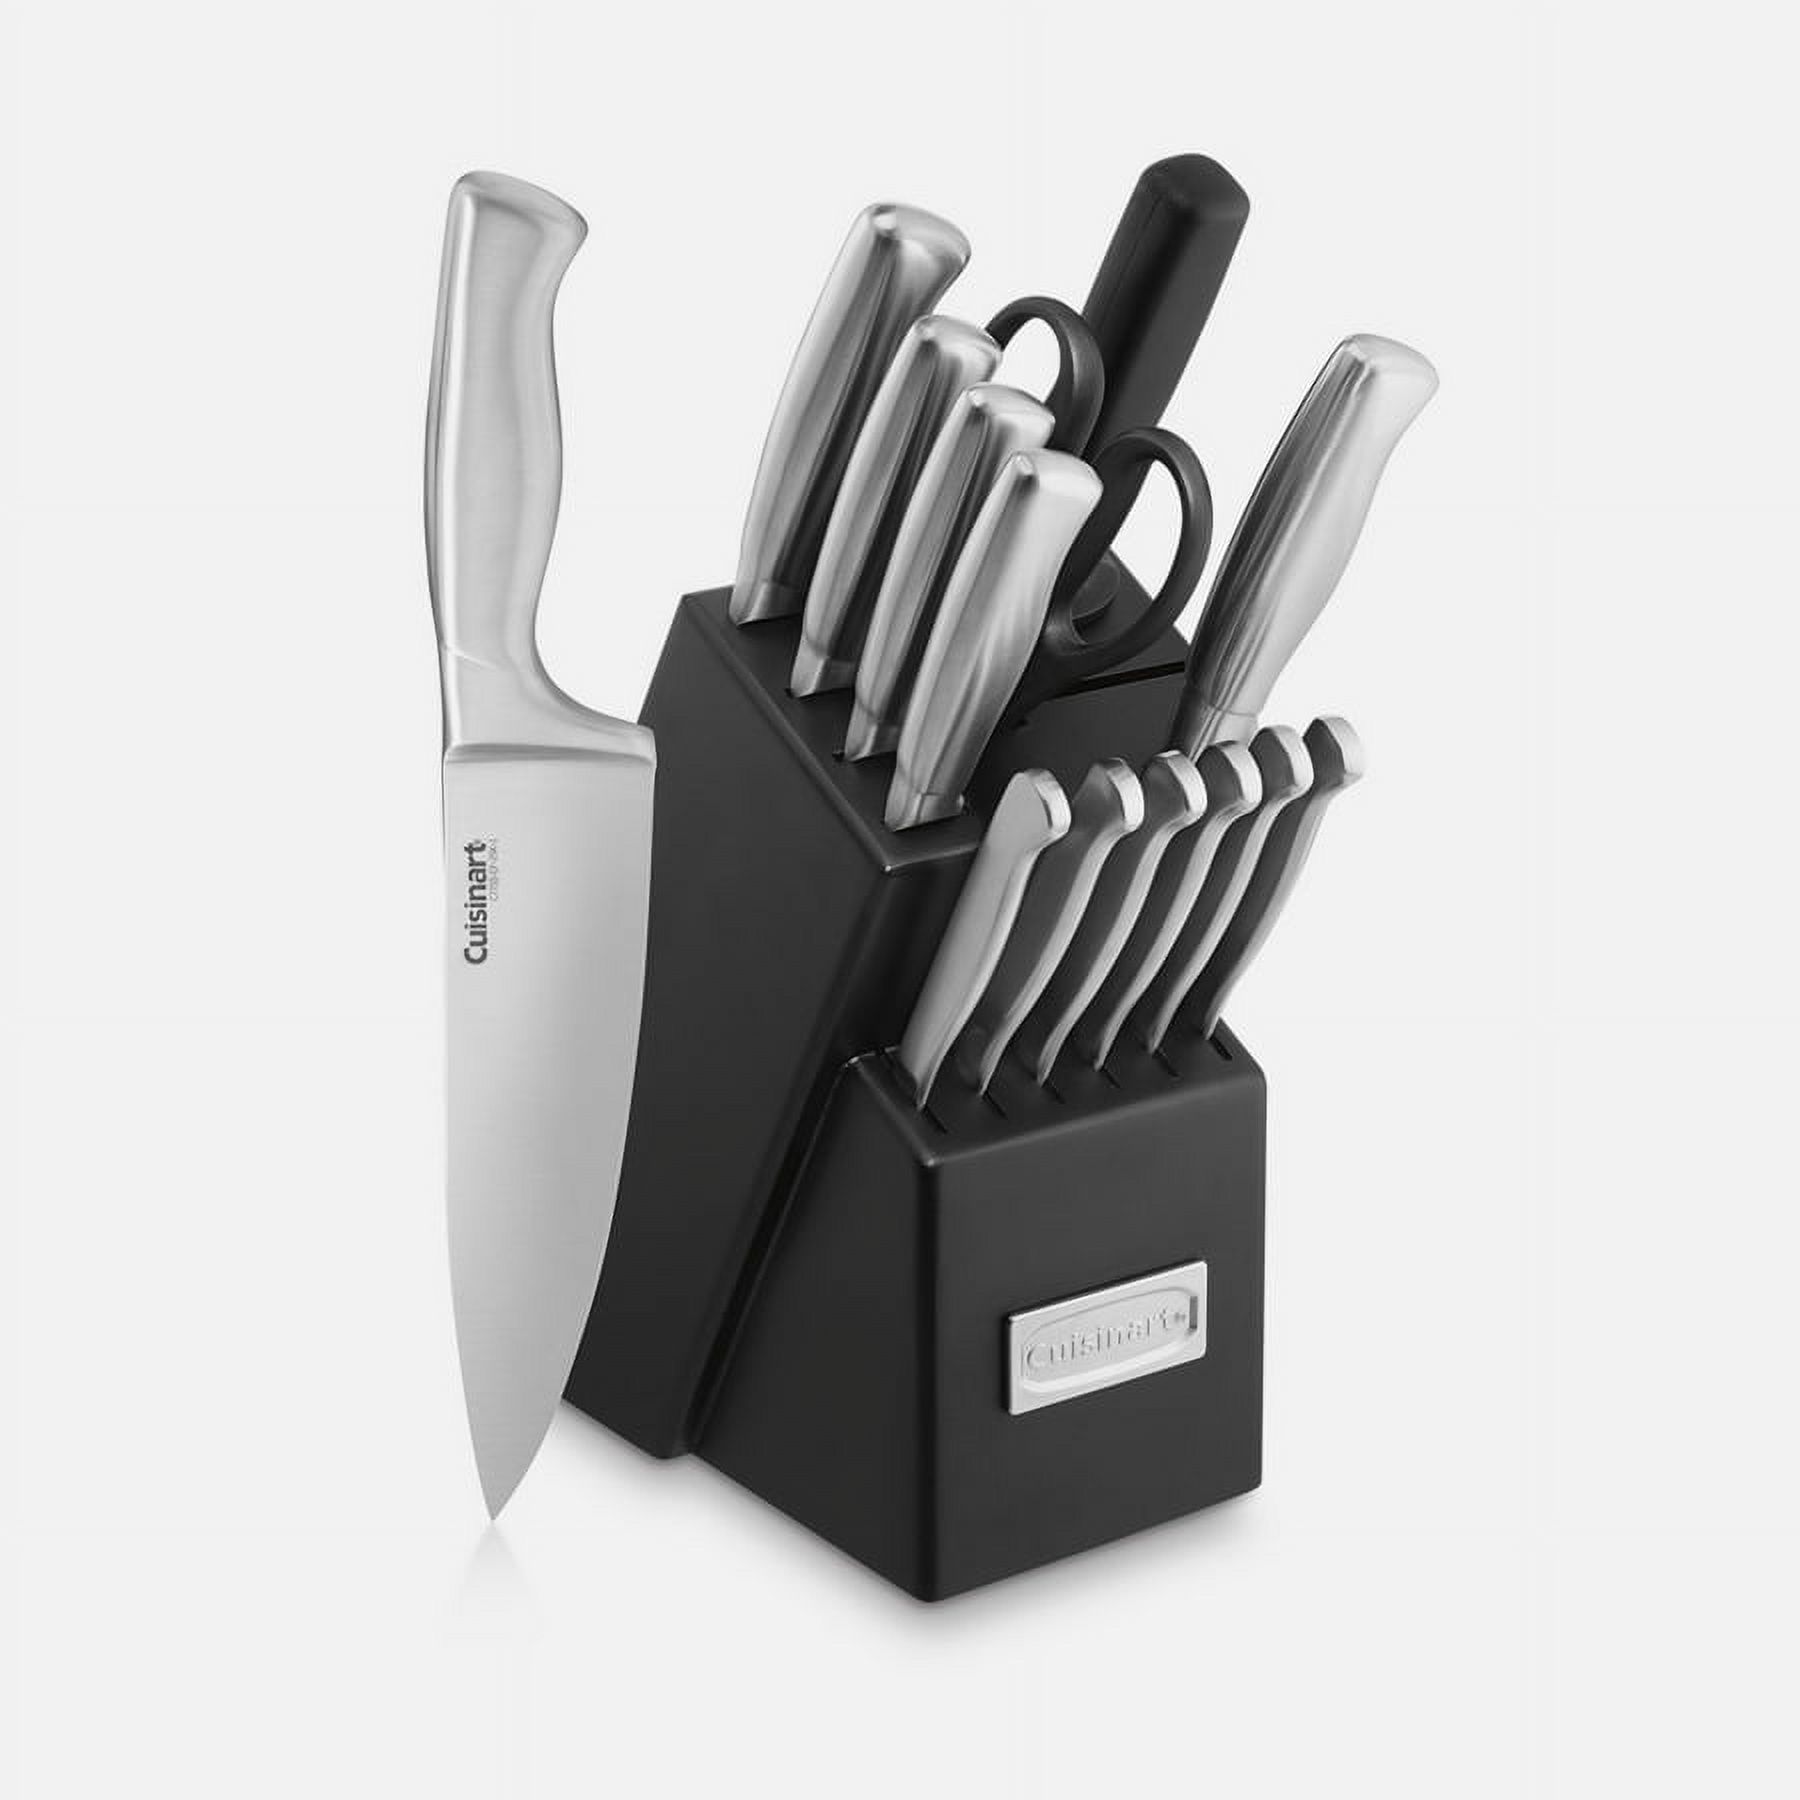 Cuisinart 15pc Stainless Steel Hollow Handle Cutlery Block Set - image 1 of 2